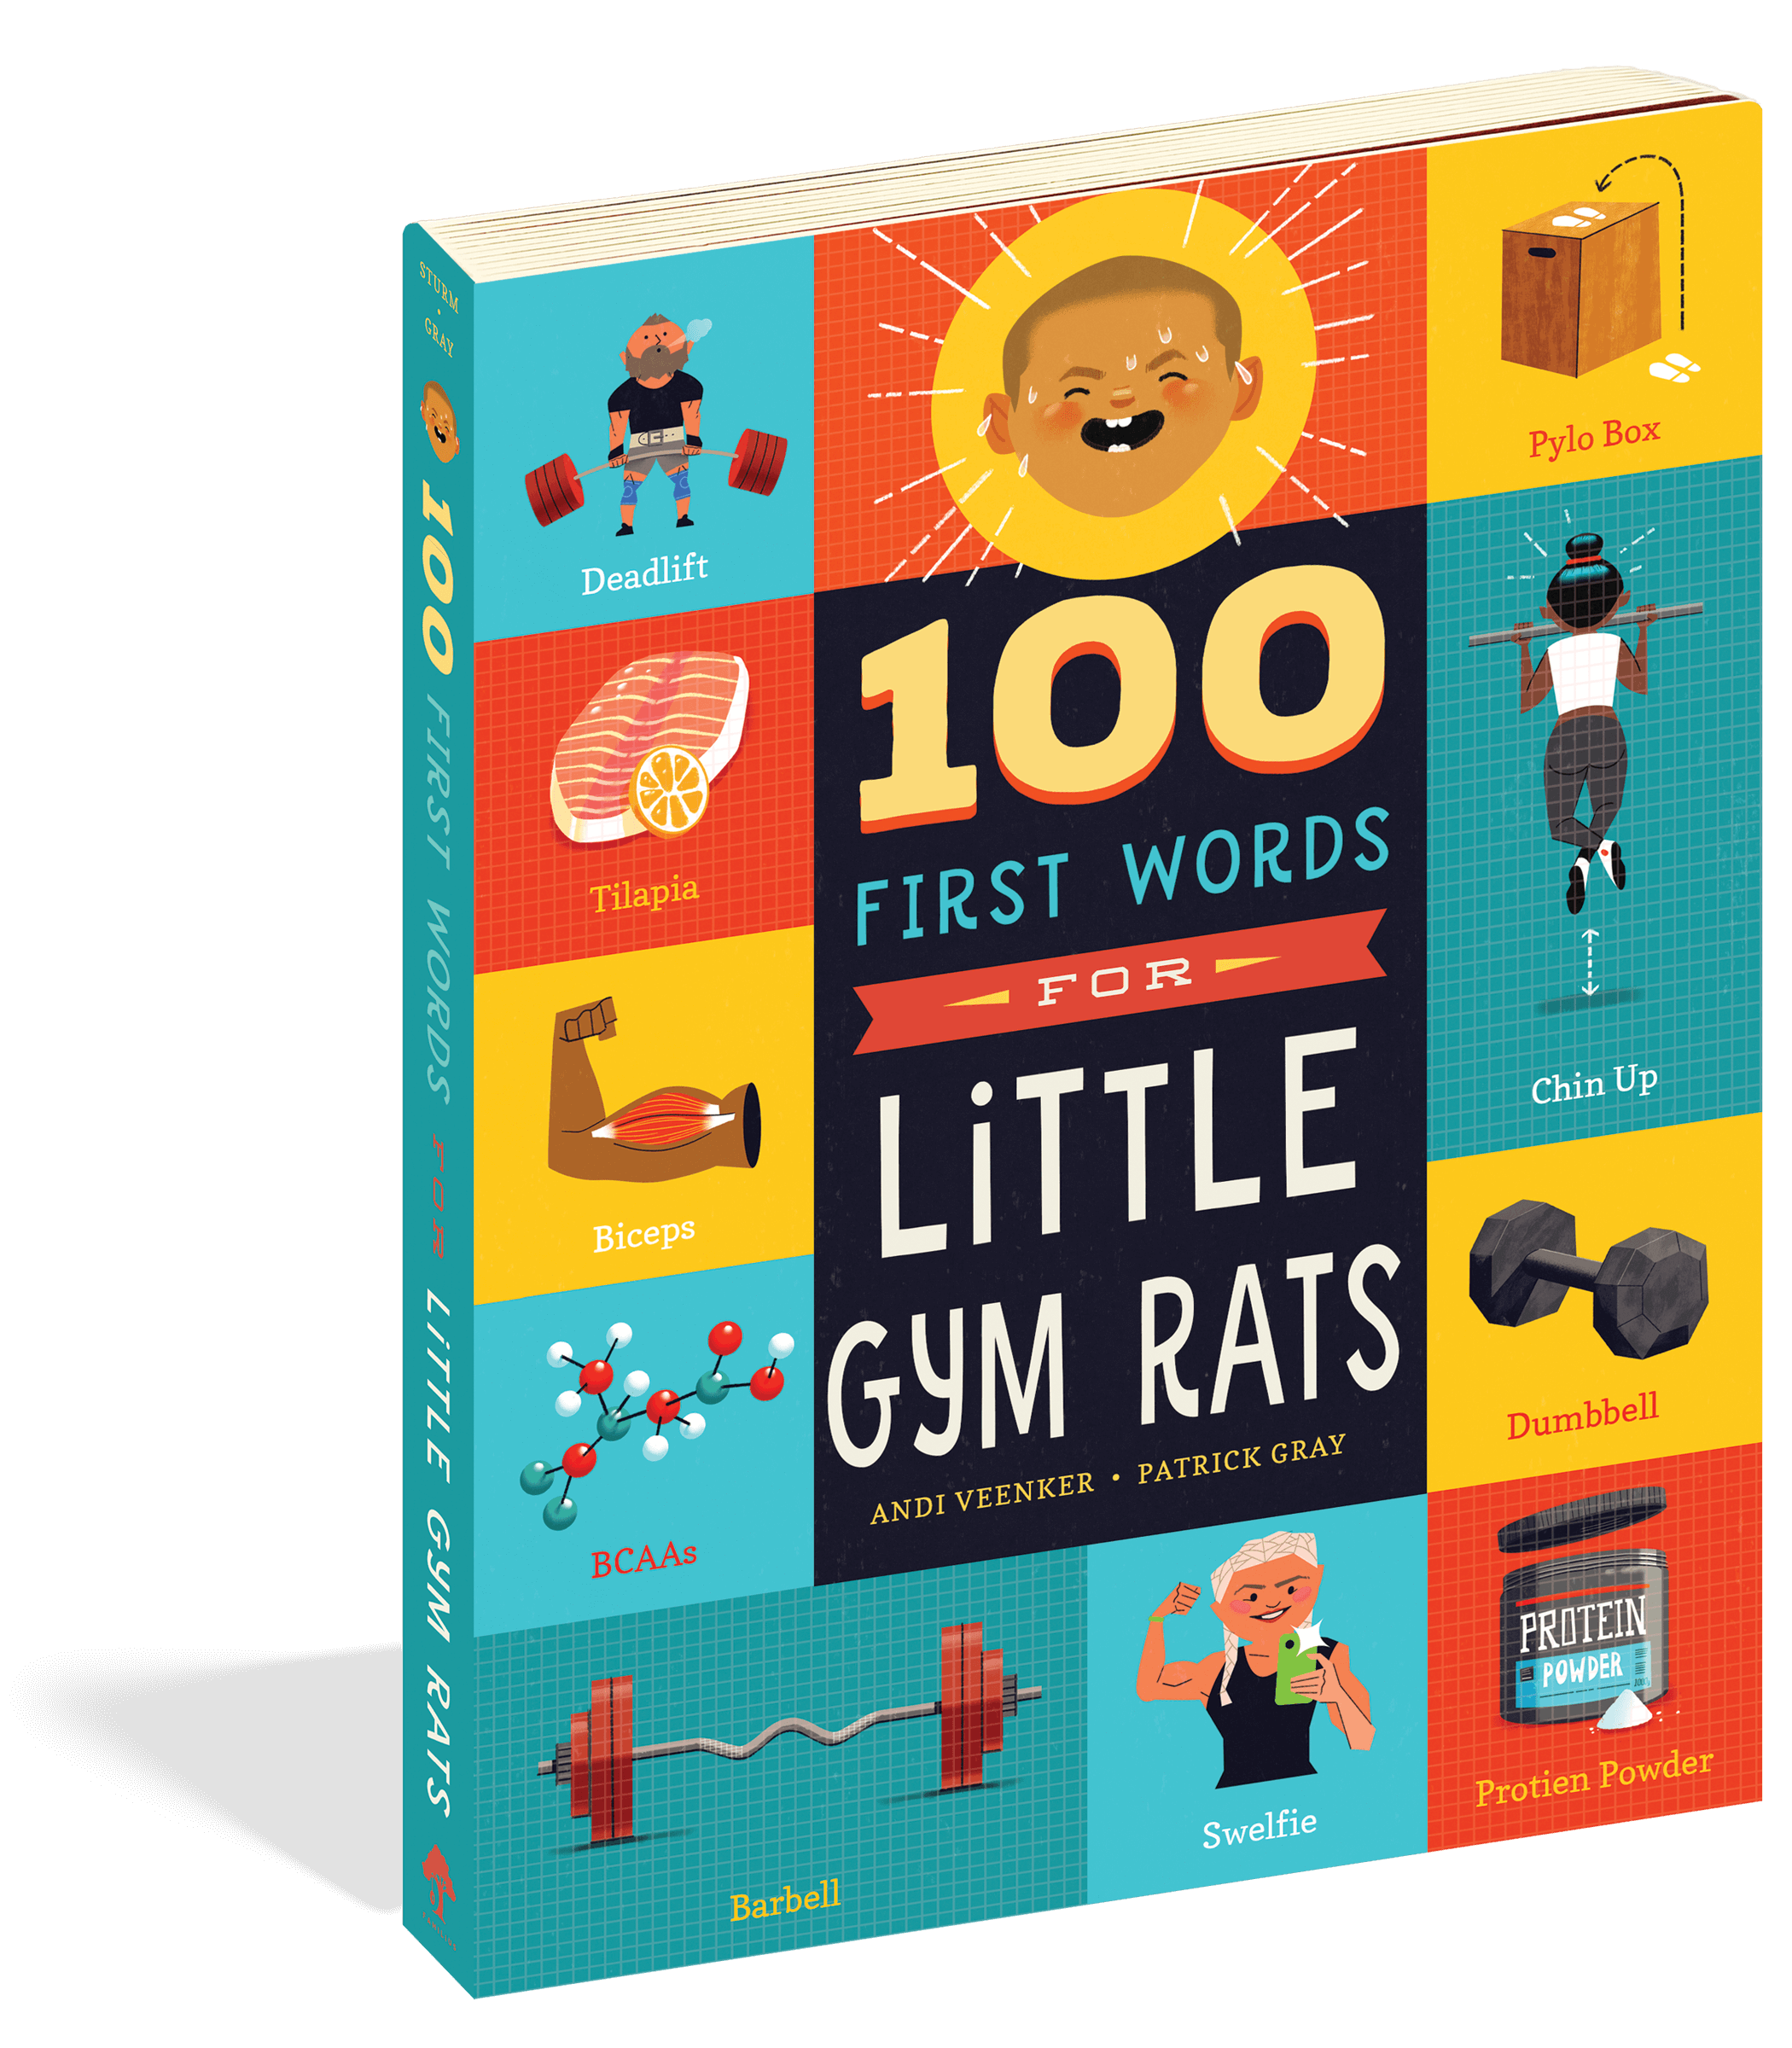 The cover of the board book 100 First Words for Little Gym Rats.